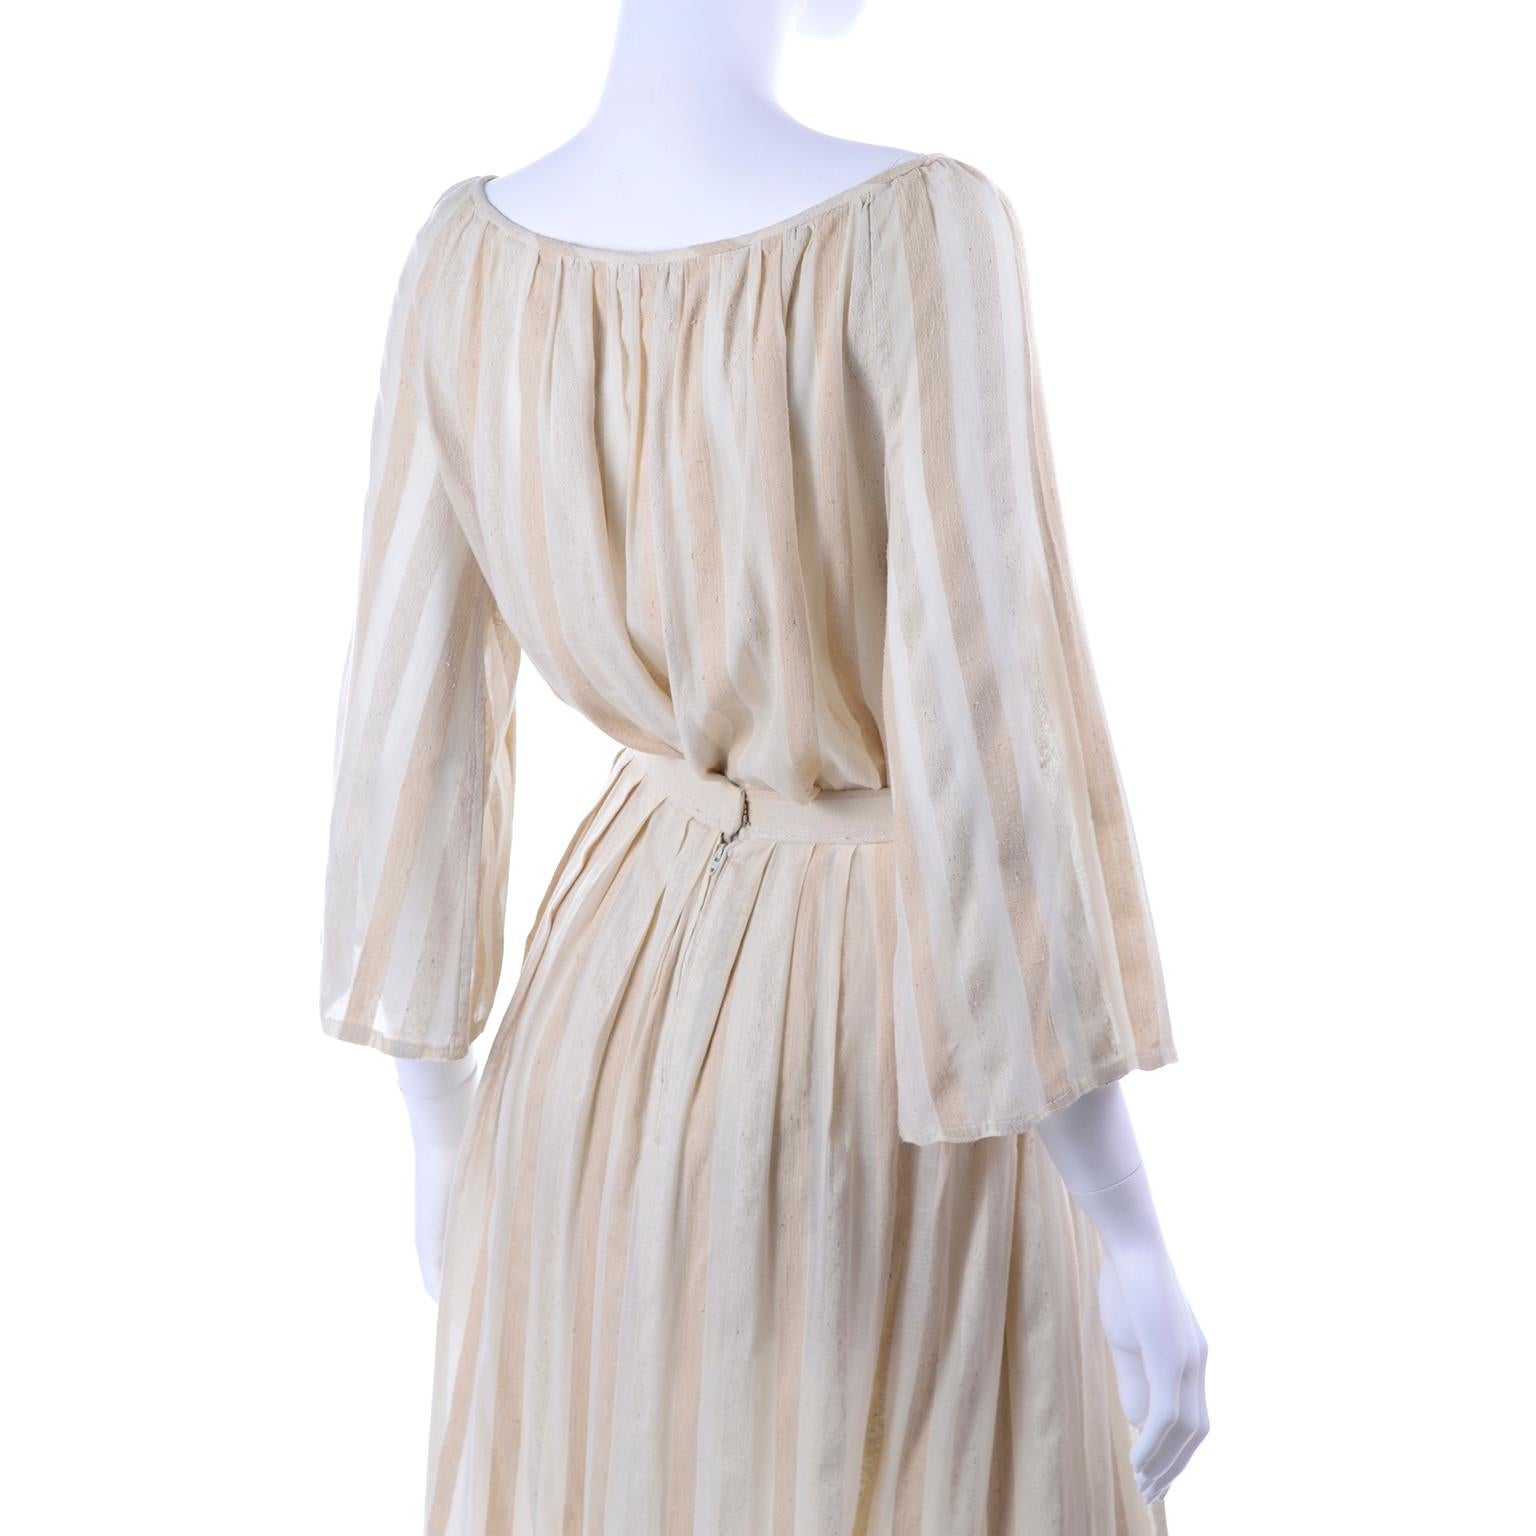 Women's Anne Klein Vintage 2 Pc Dress Skirt & Peasant Top in Natural Linen & Raw Silk For Sale